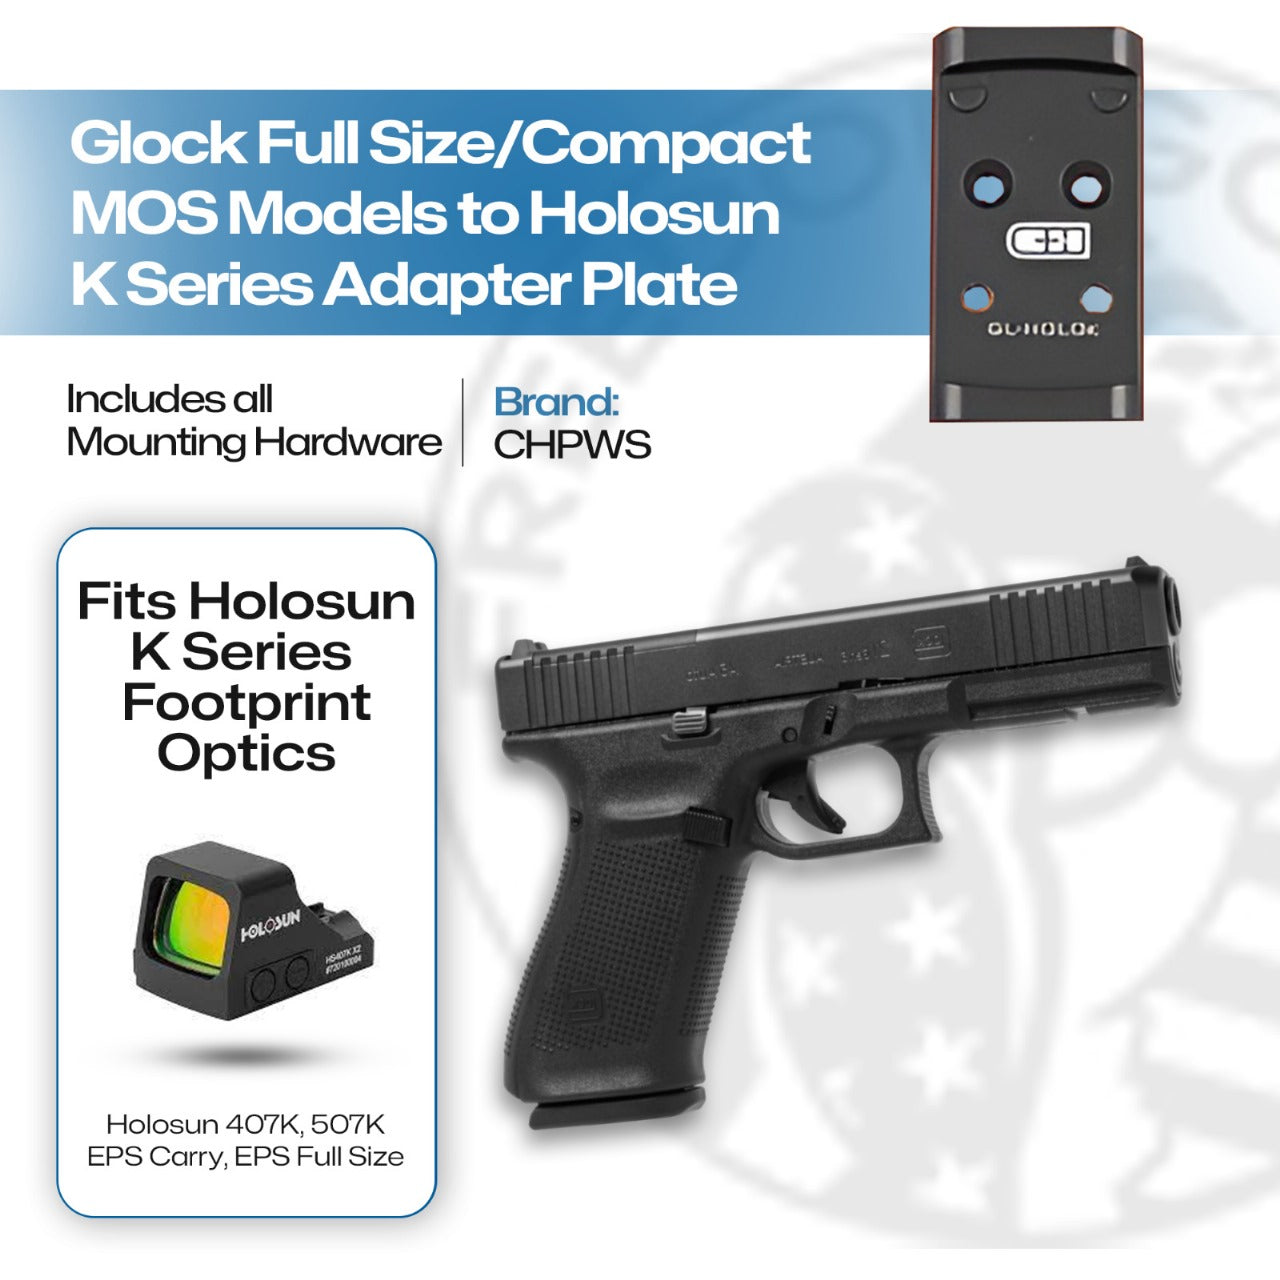 Glock Full Size/Compact MOS to Holosun 407K/507K/EPS/EPS Carry Adapter Plate (Not 43X or 48) - CHPWS - GL-HOLOK